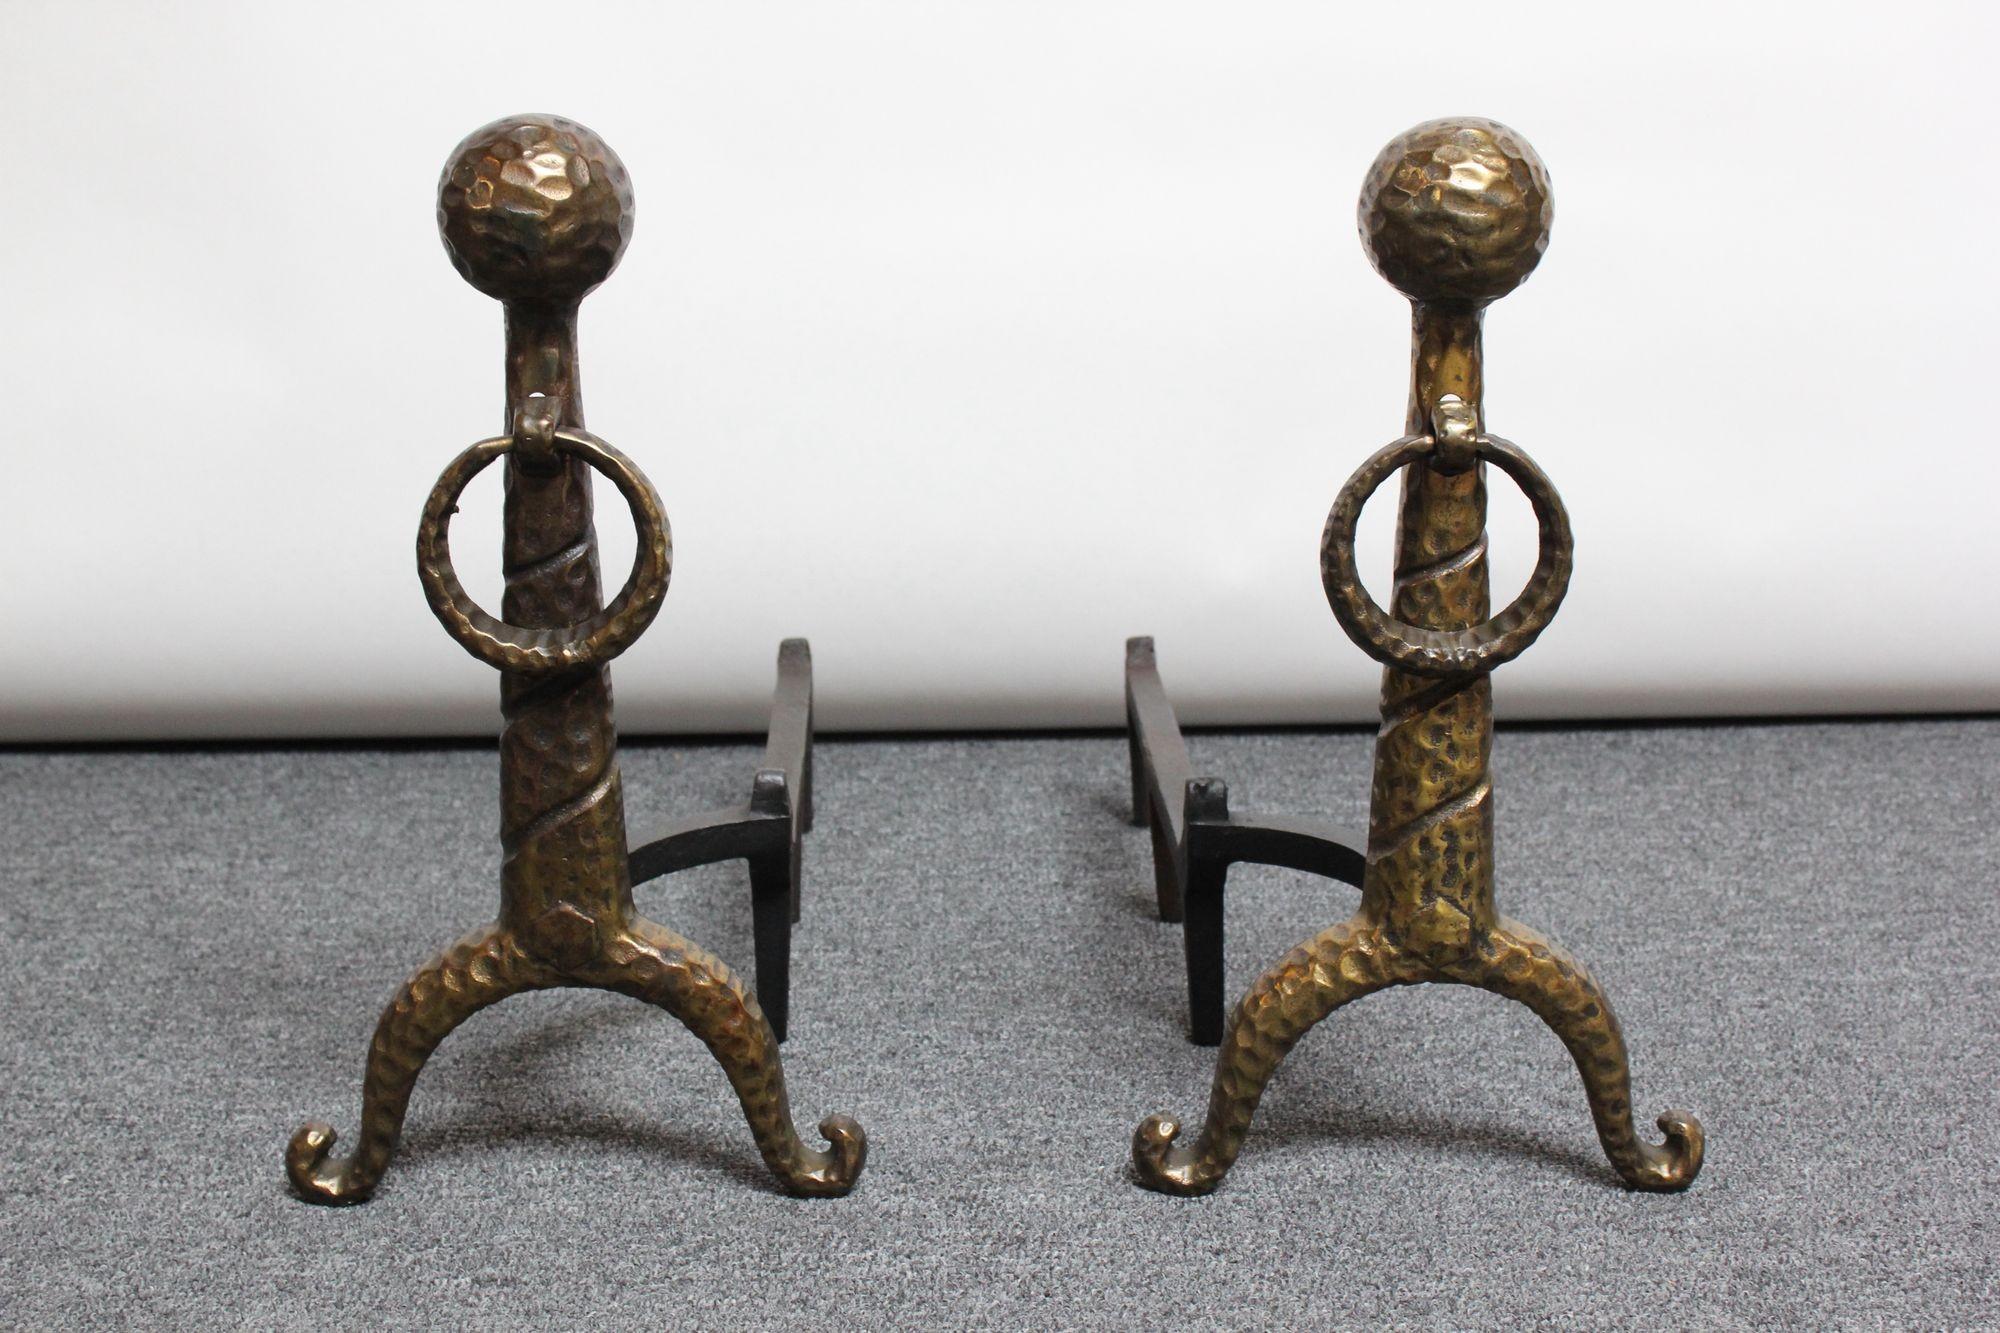 Circa 1940s Arts & Crafts-Style andirons composed of hammered ball and ring cast-brass uprights attached to an iron billet bar.
Very fine, vintage condition with patina/light wear present to the cast-brass; black paint has been touched up.
H: 18.13